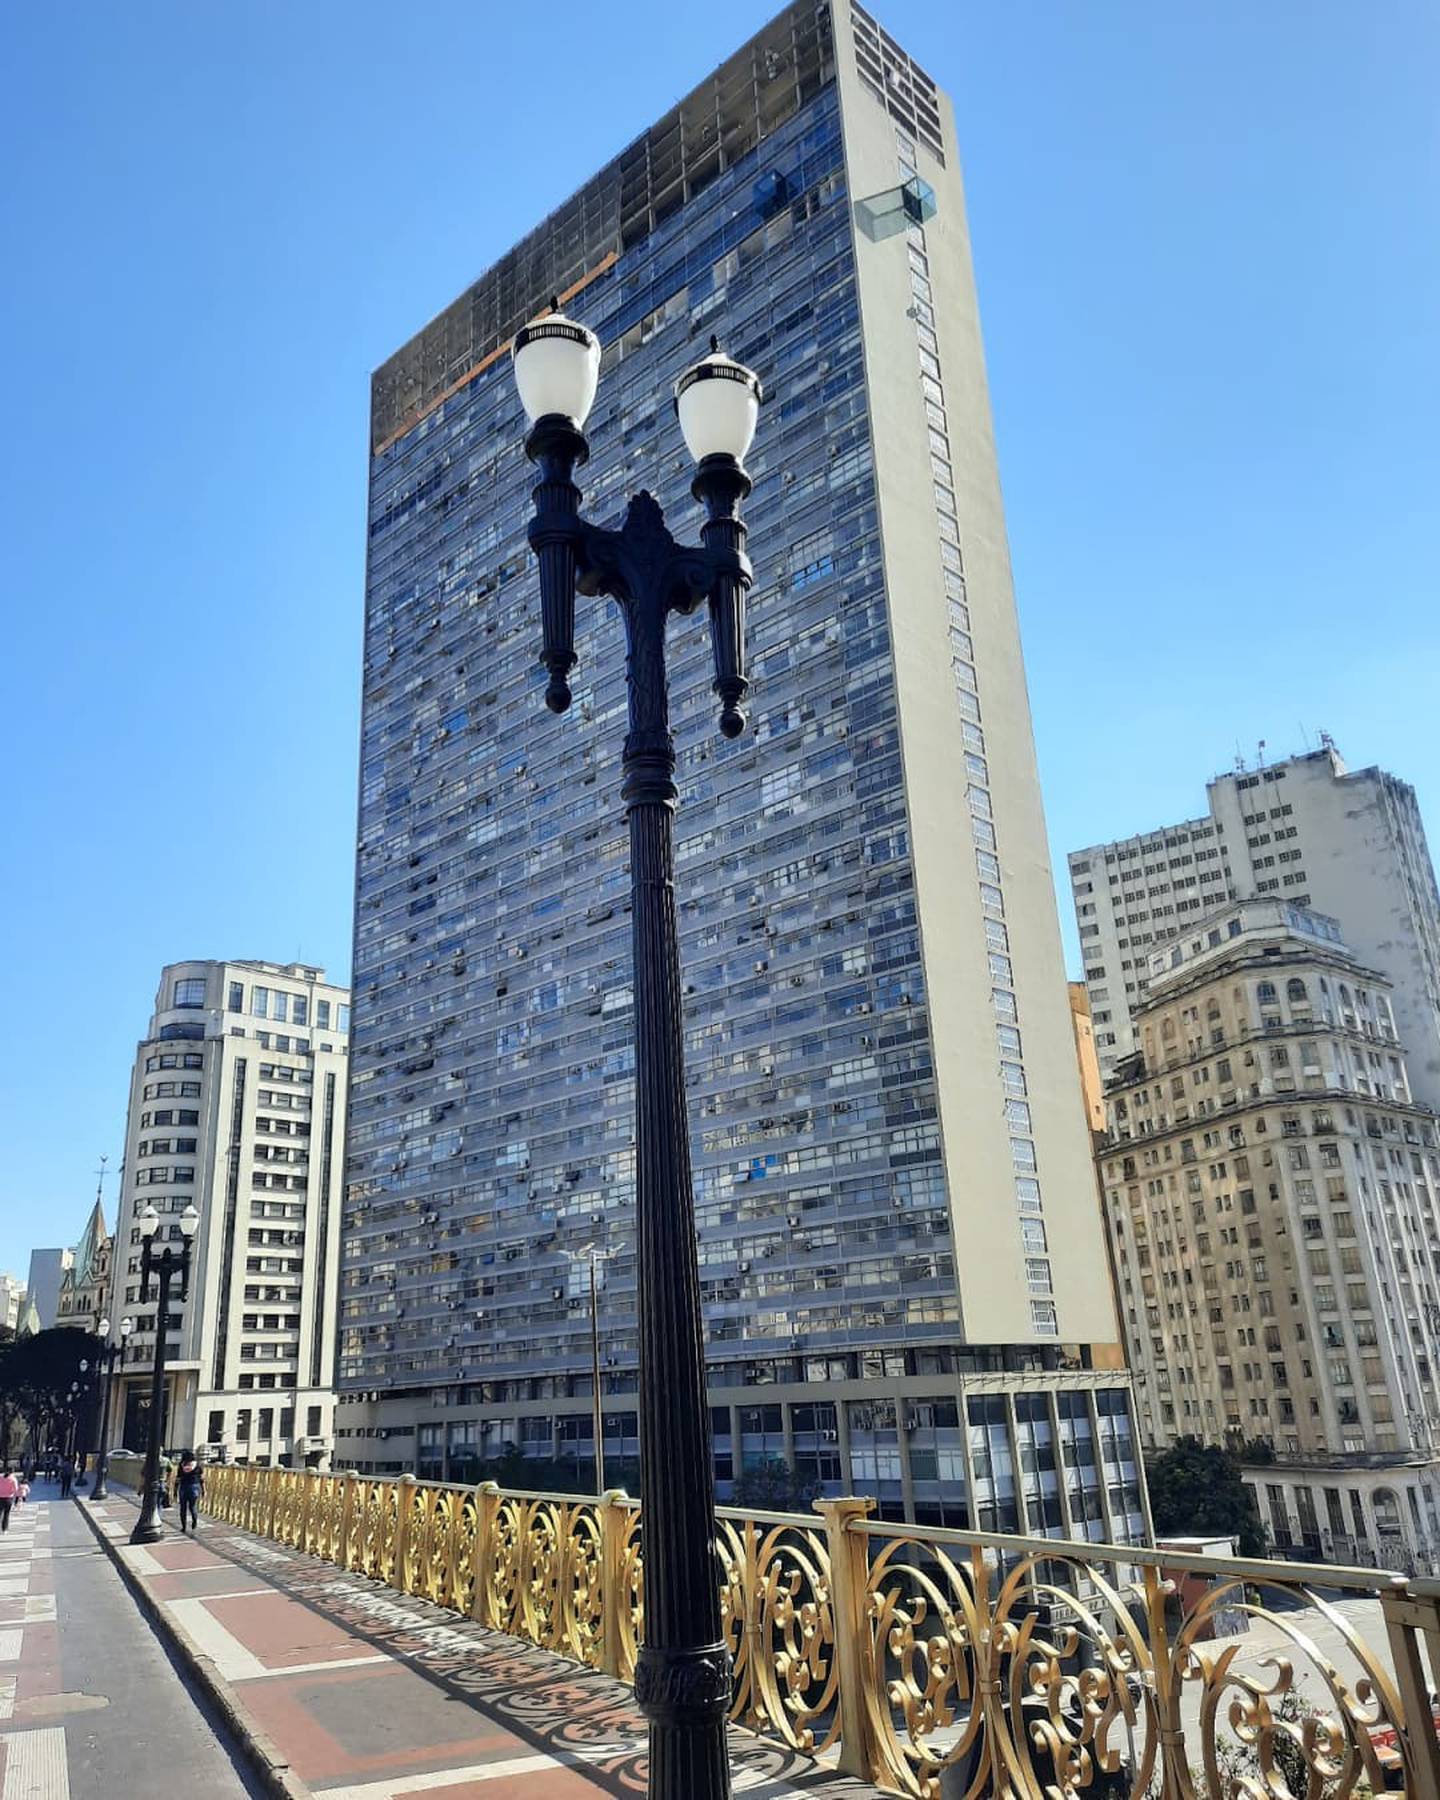 Formerly the tallest building in Latin America, the Mirante do Vale offers a view of the Anhangabaú region from the 42nd floor through glass windows that extend outside the facade. dfd